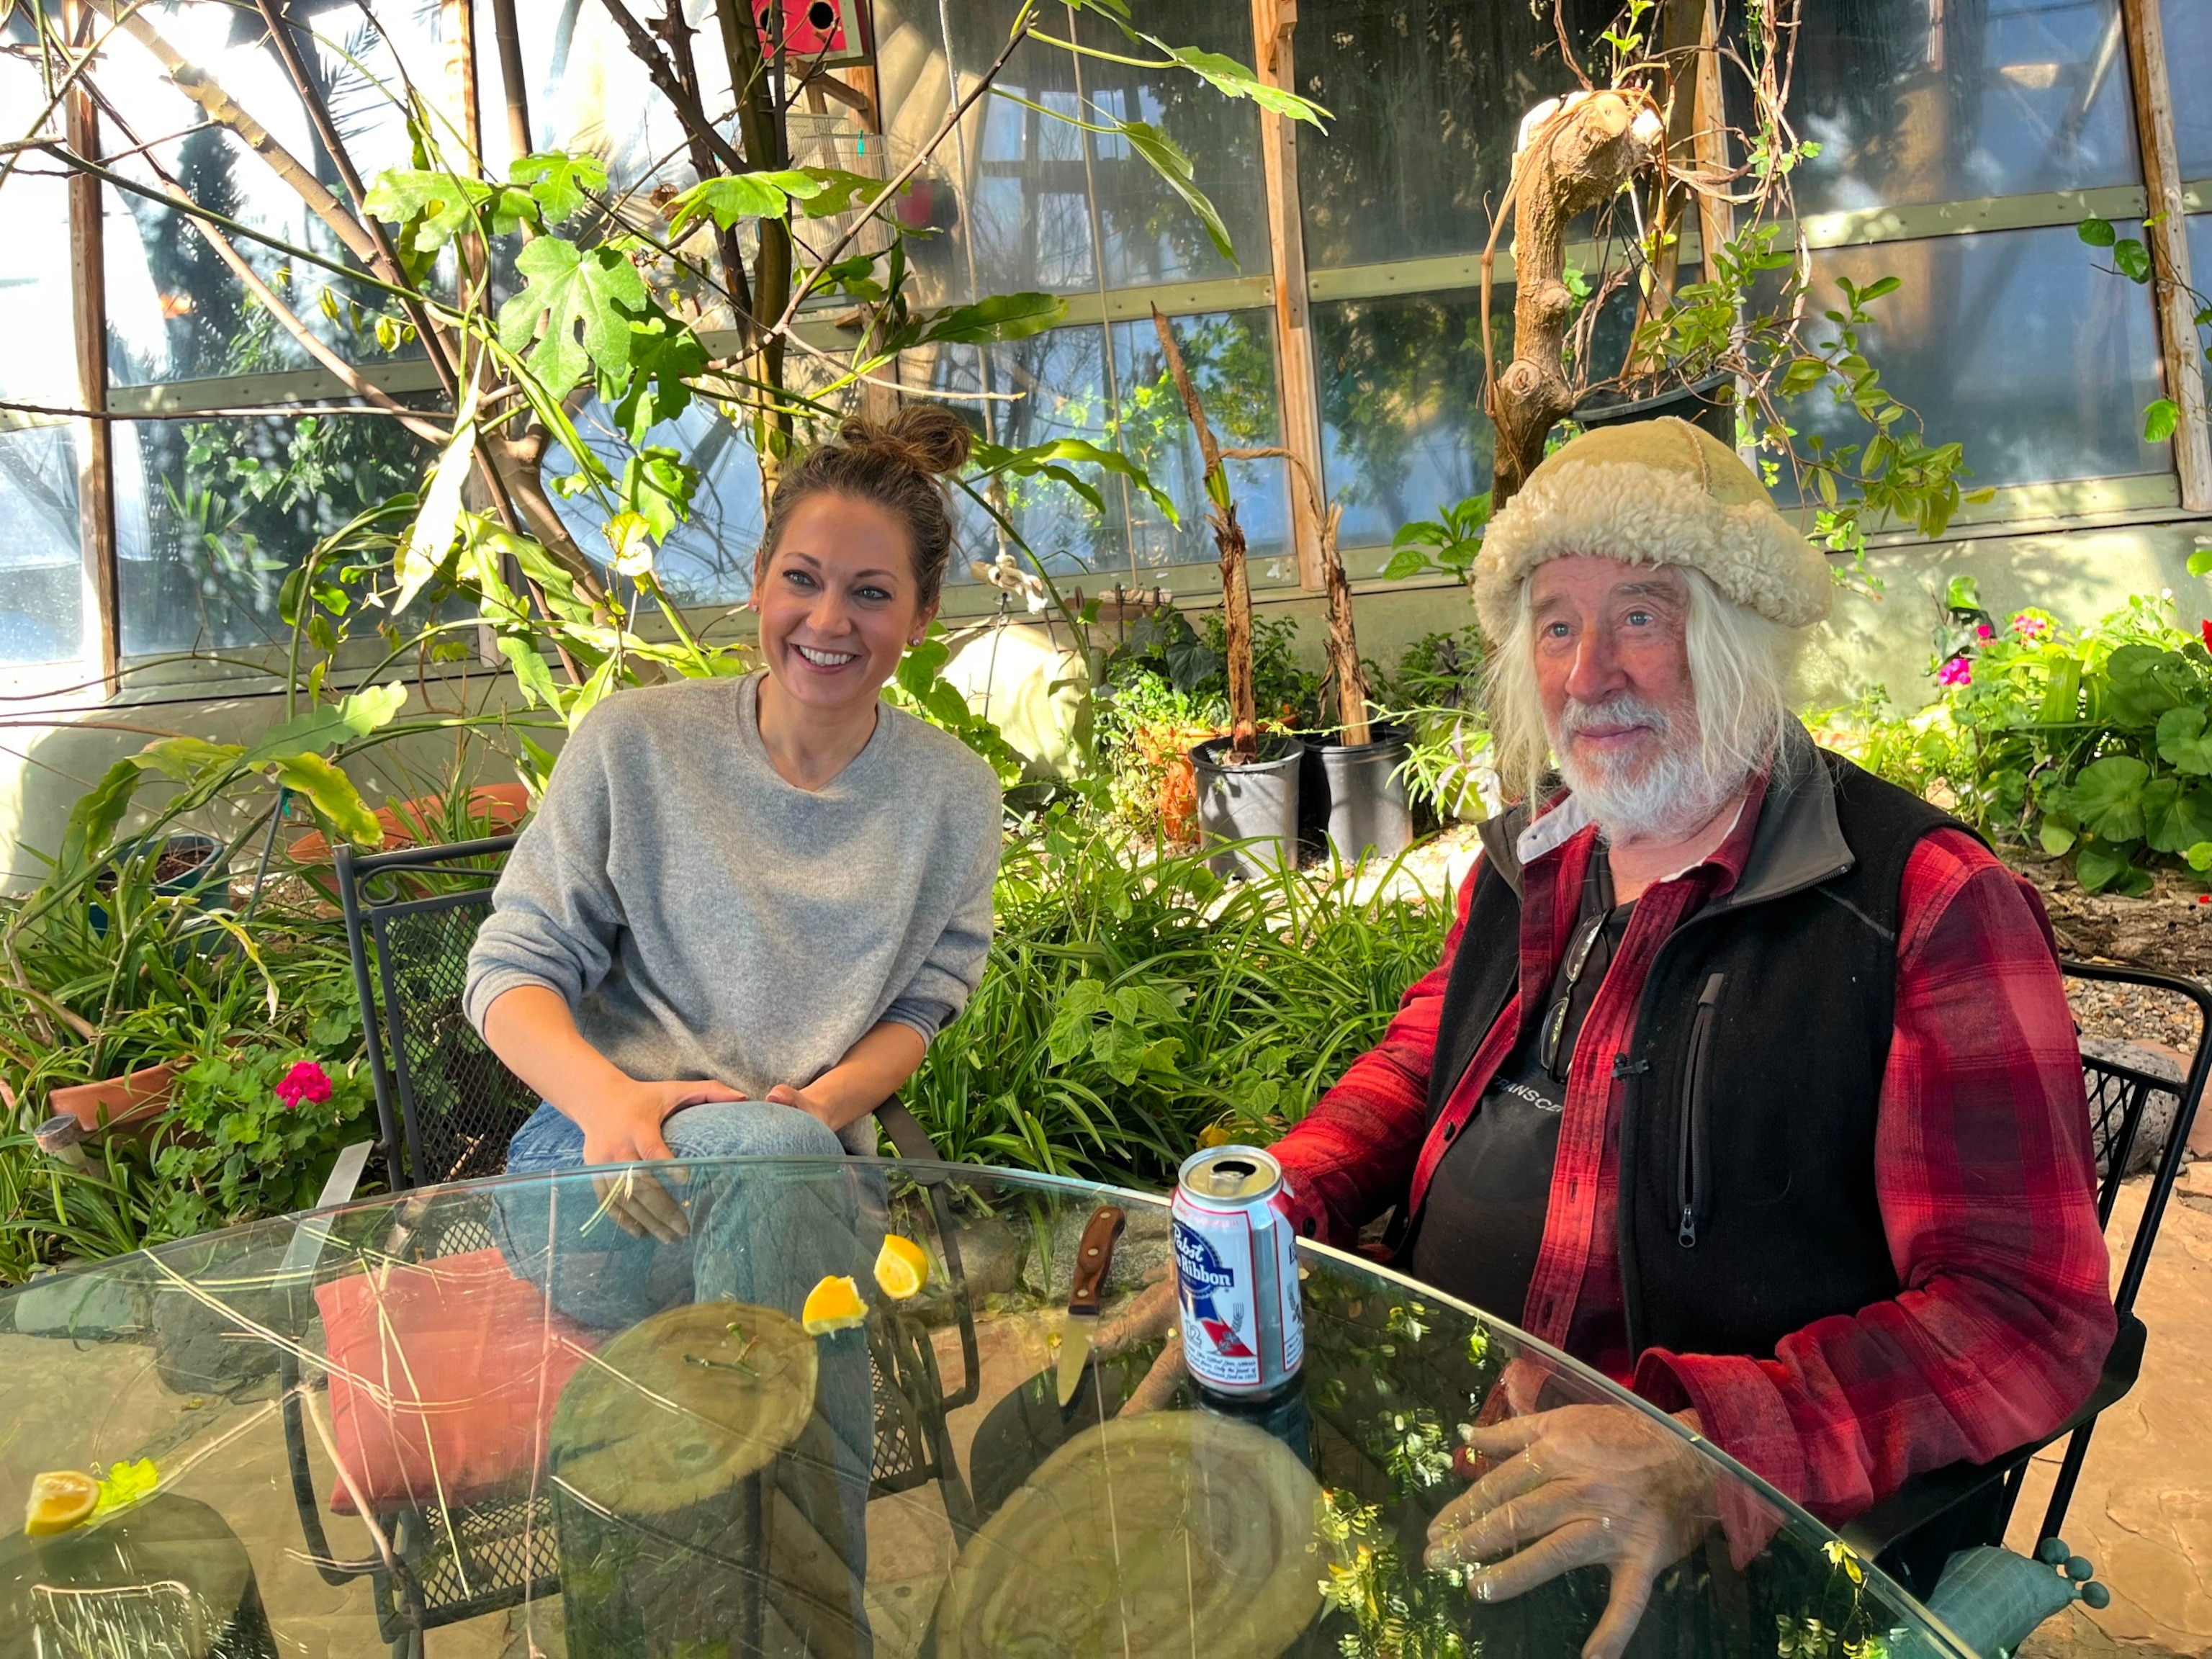 Photo: News chief meteorologist and chief climate reporter Ginger Zee sits outside Earthship near Taos, New Mexico, with Michael Reynolds, founder and founder of Earthship Biotecture.